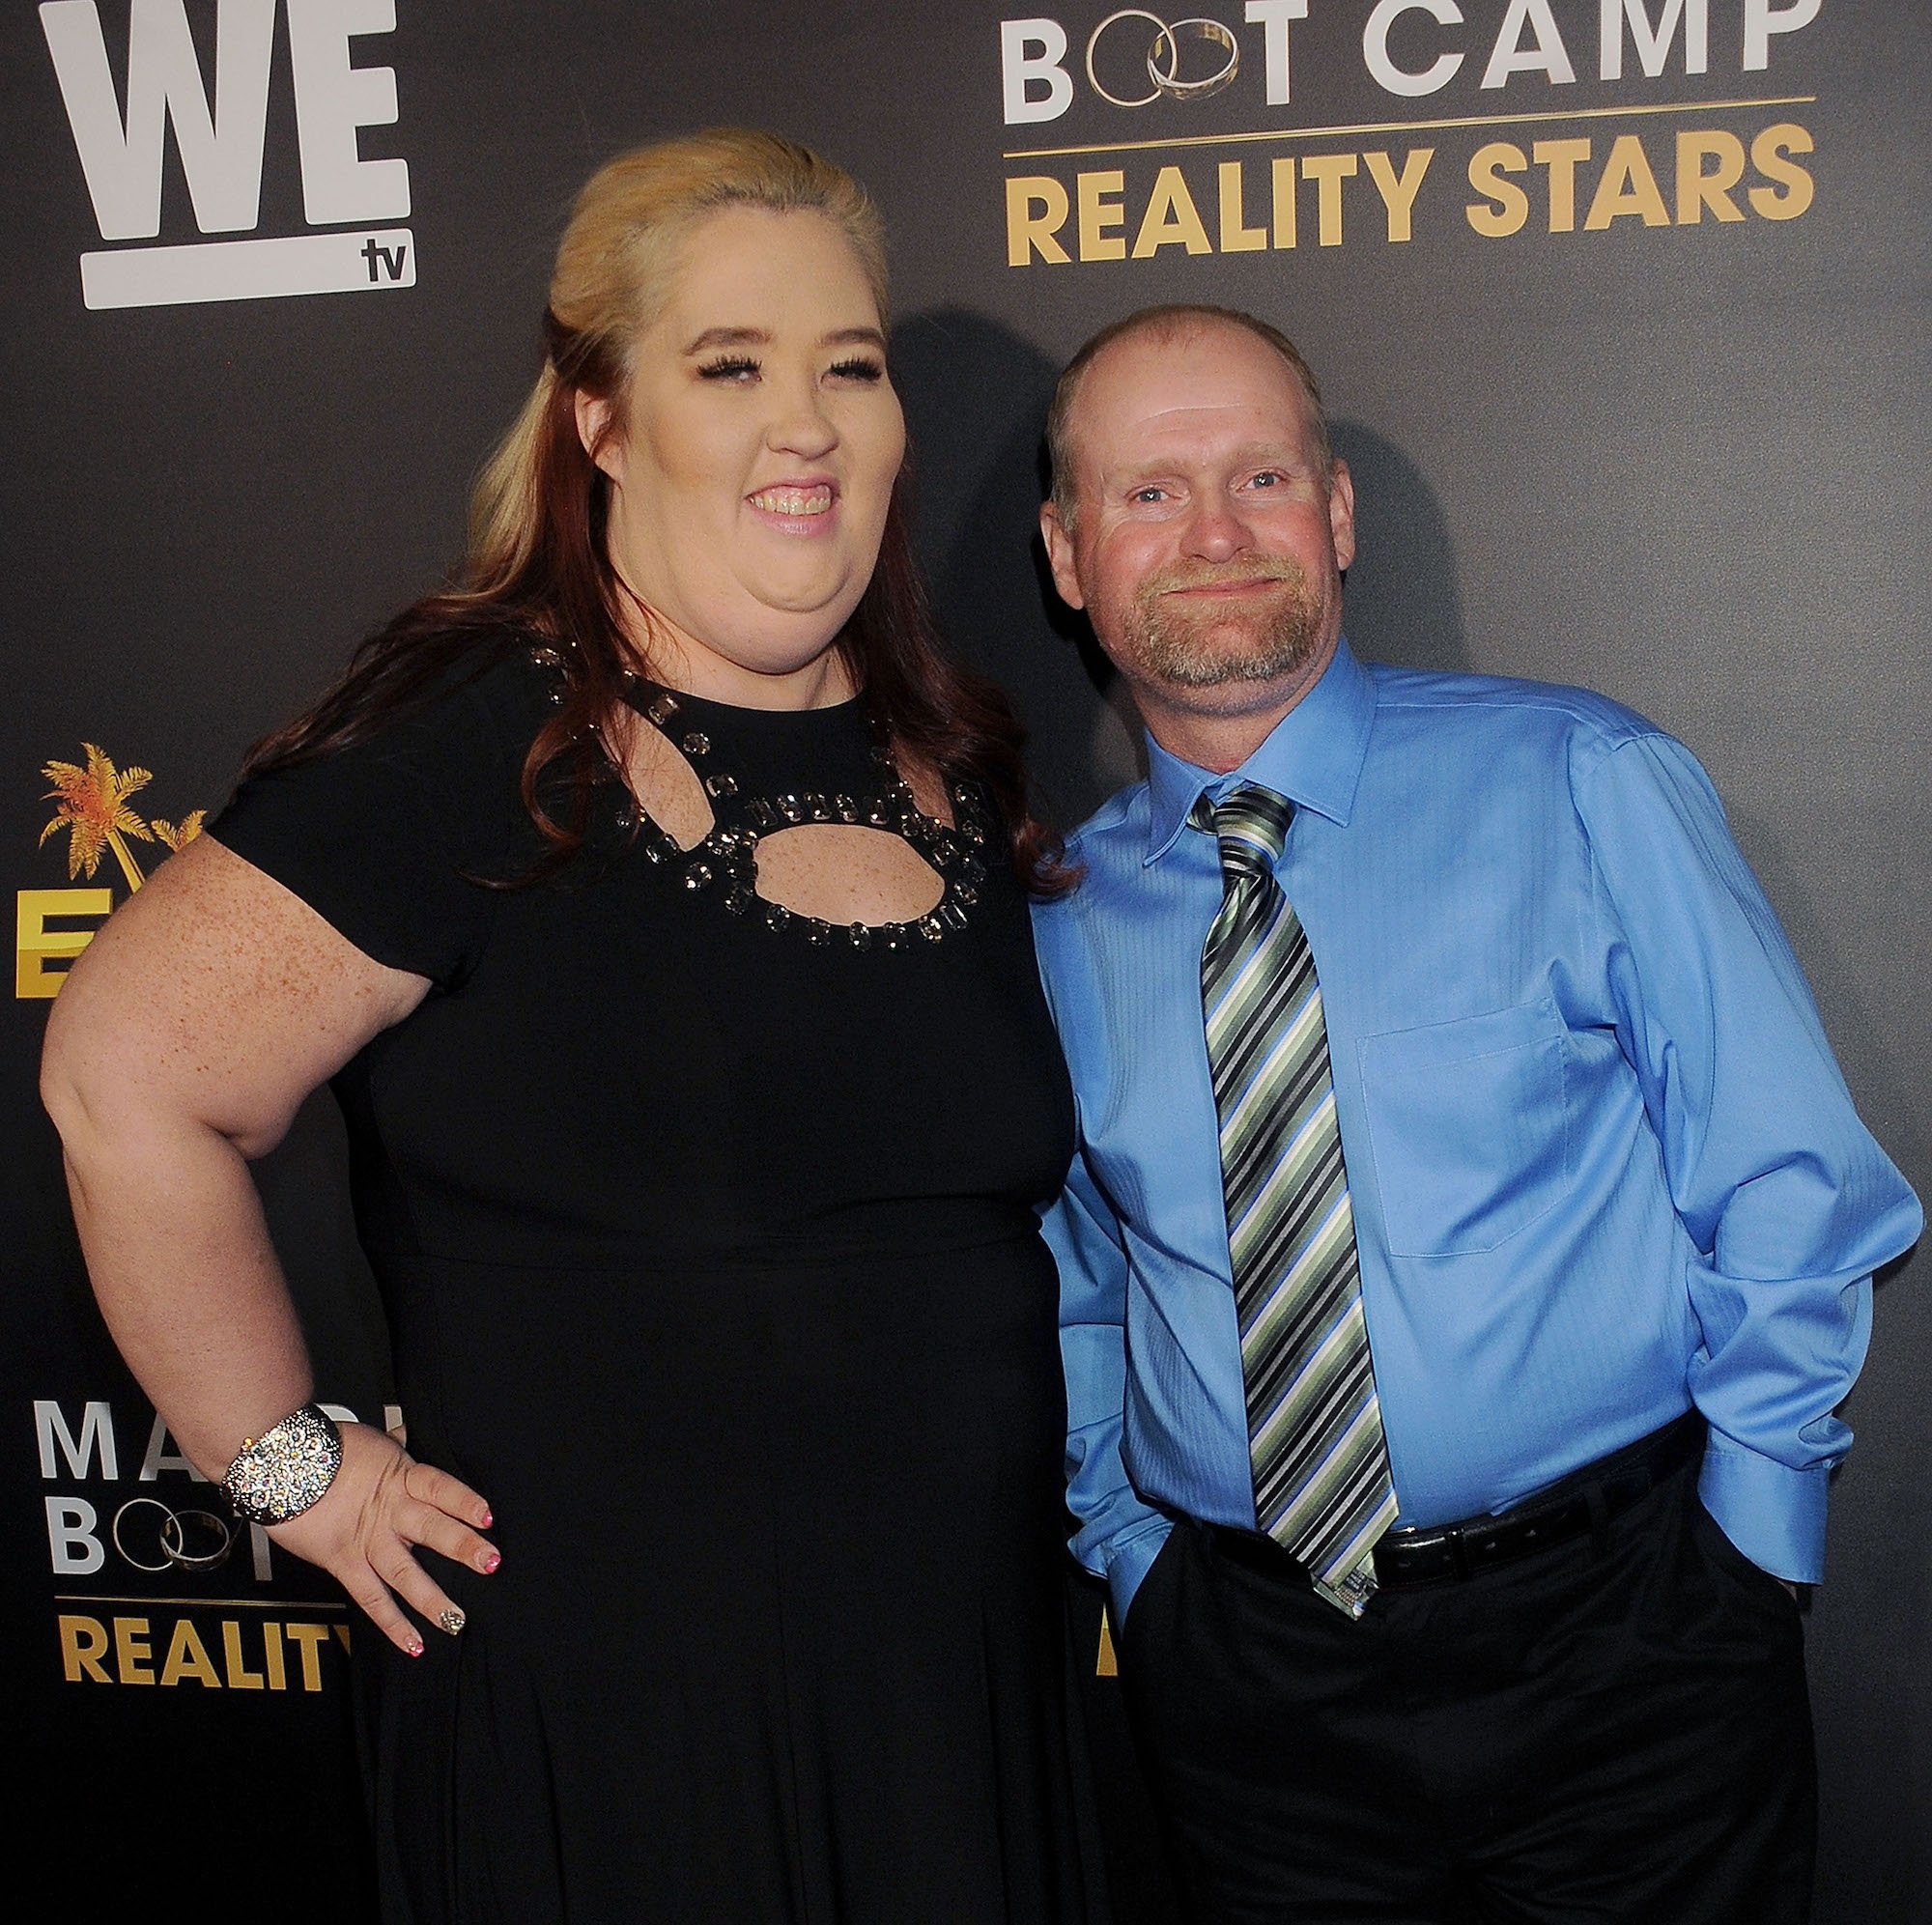 Mama June Shannon and Mike "Sugar Bear" Thompson attending the premiere of "Marriage Boot Camp" Reality Stars in 2015